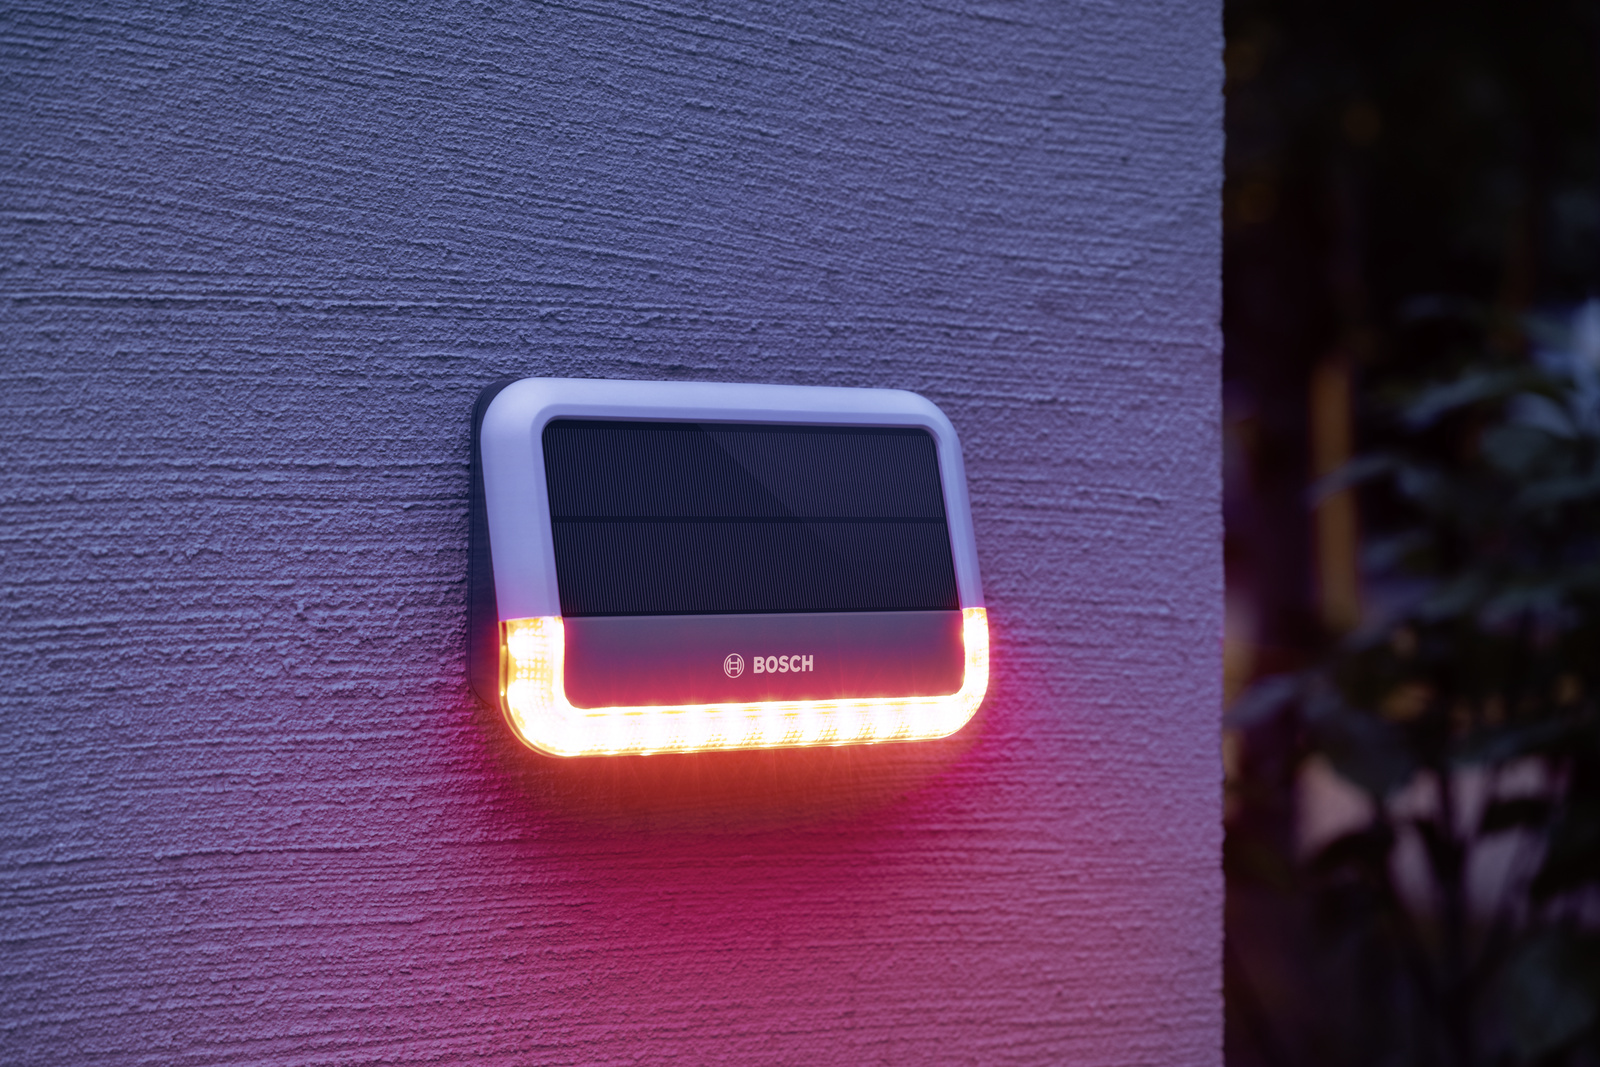 The new outdoor siren from Bosch Smart Home